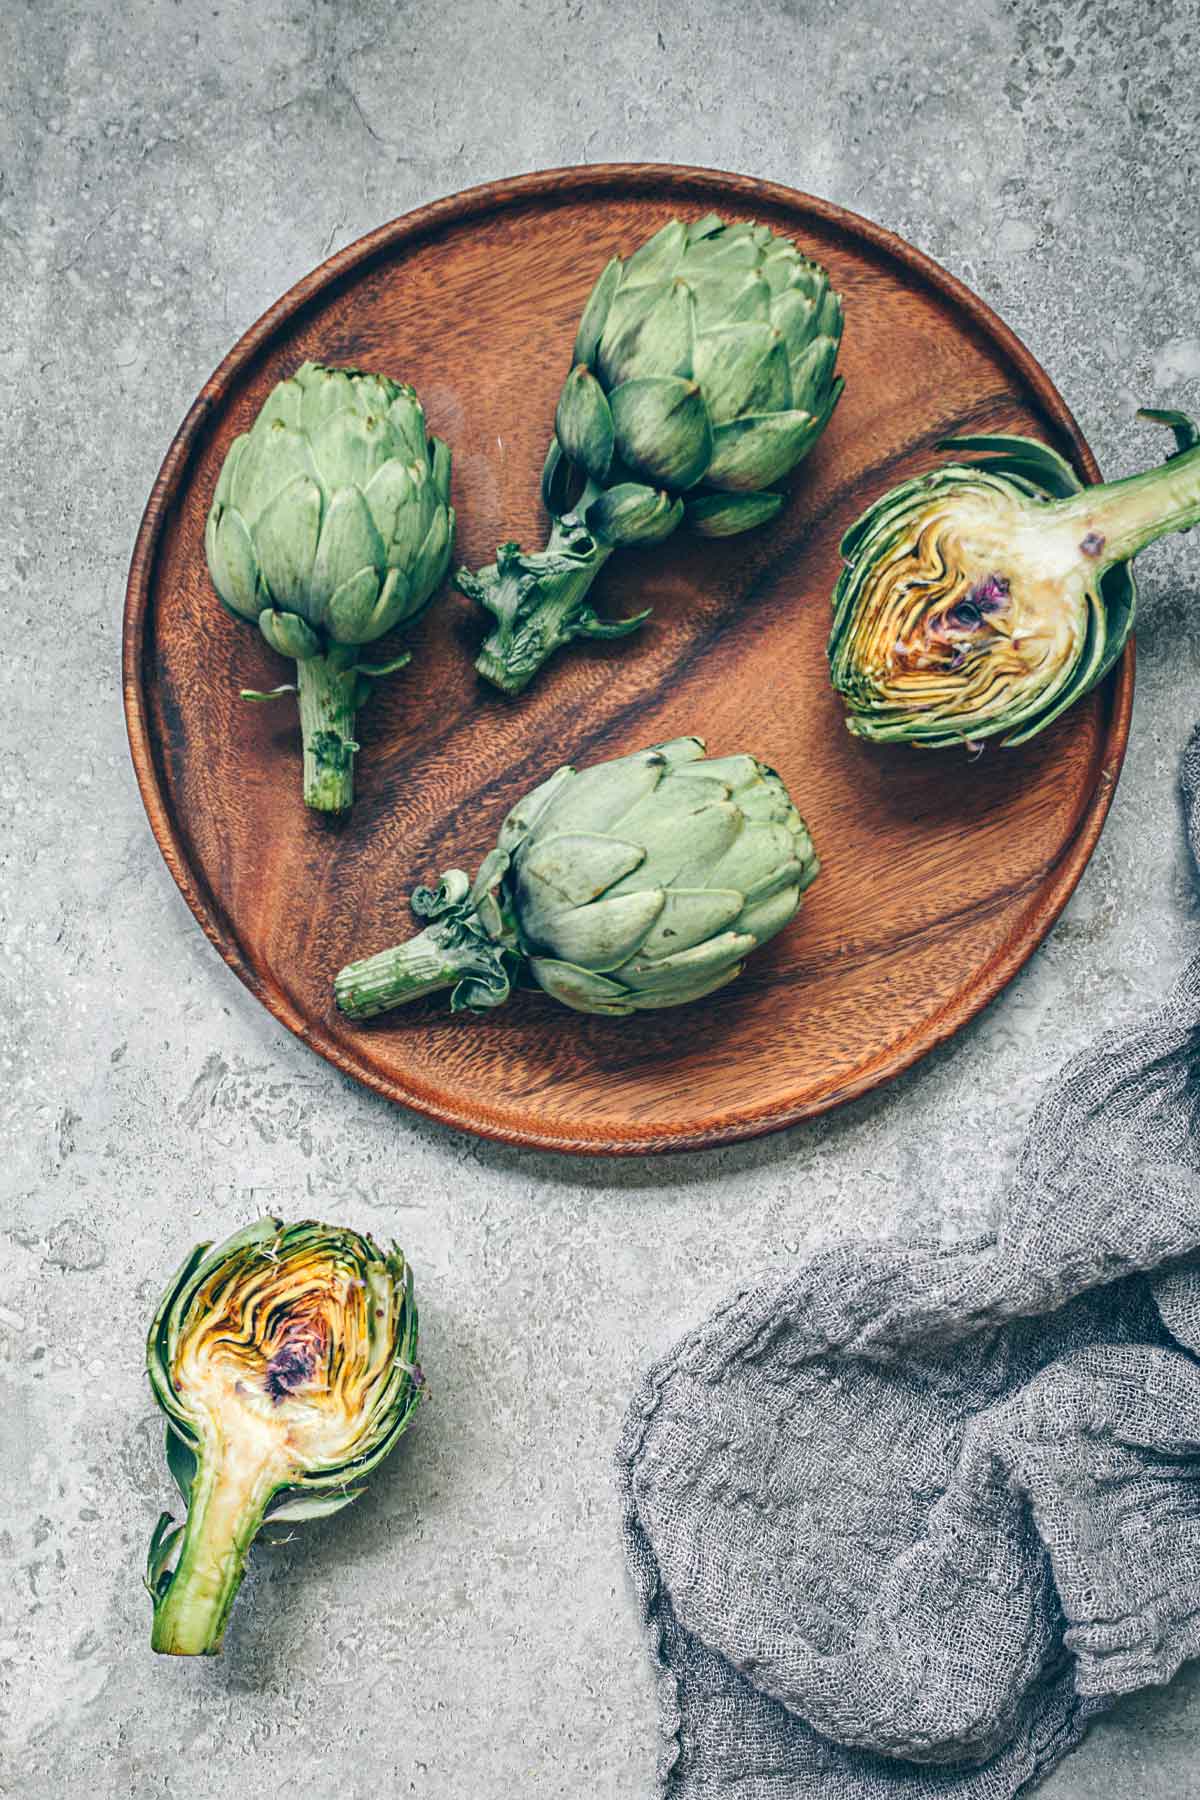 A wooden charger with fresh artichokes on top, two are sliced in half revealing their hearts.